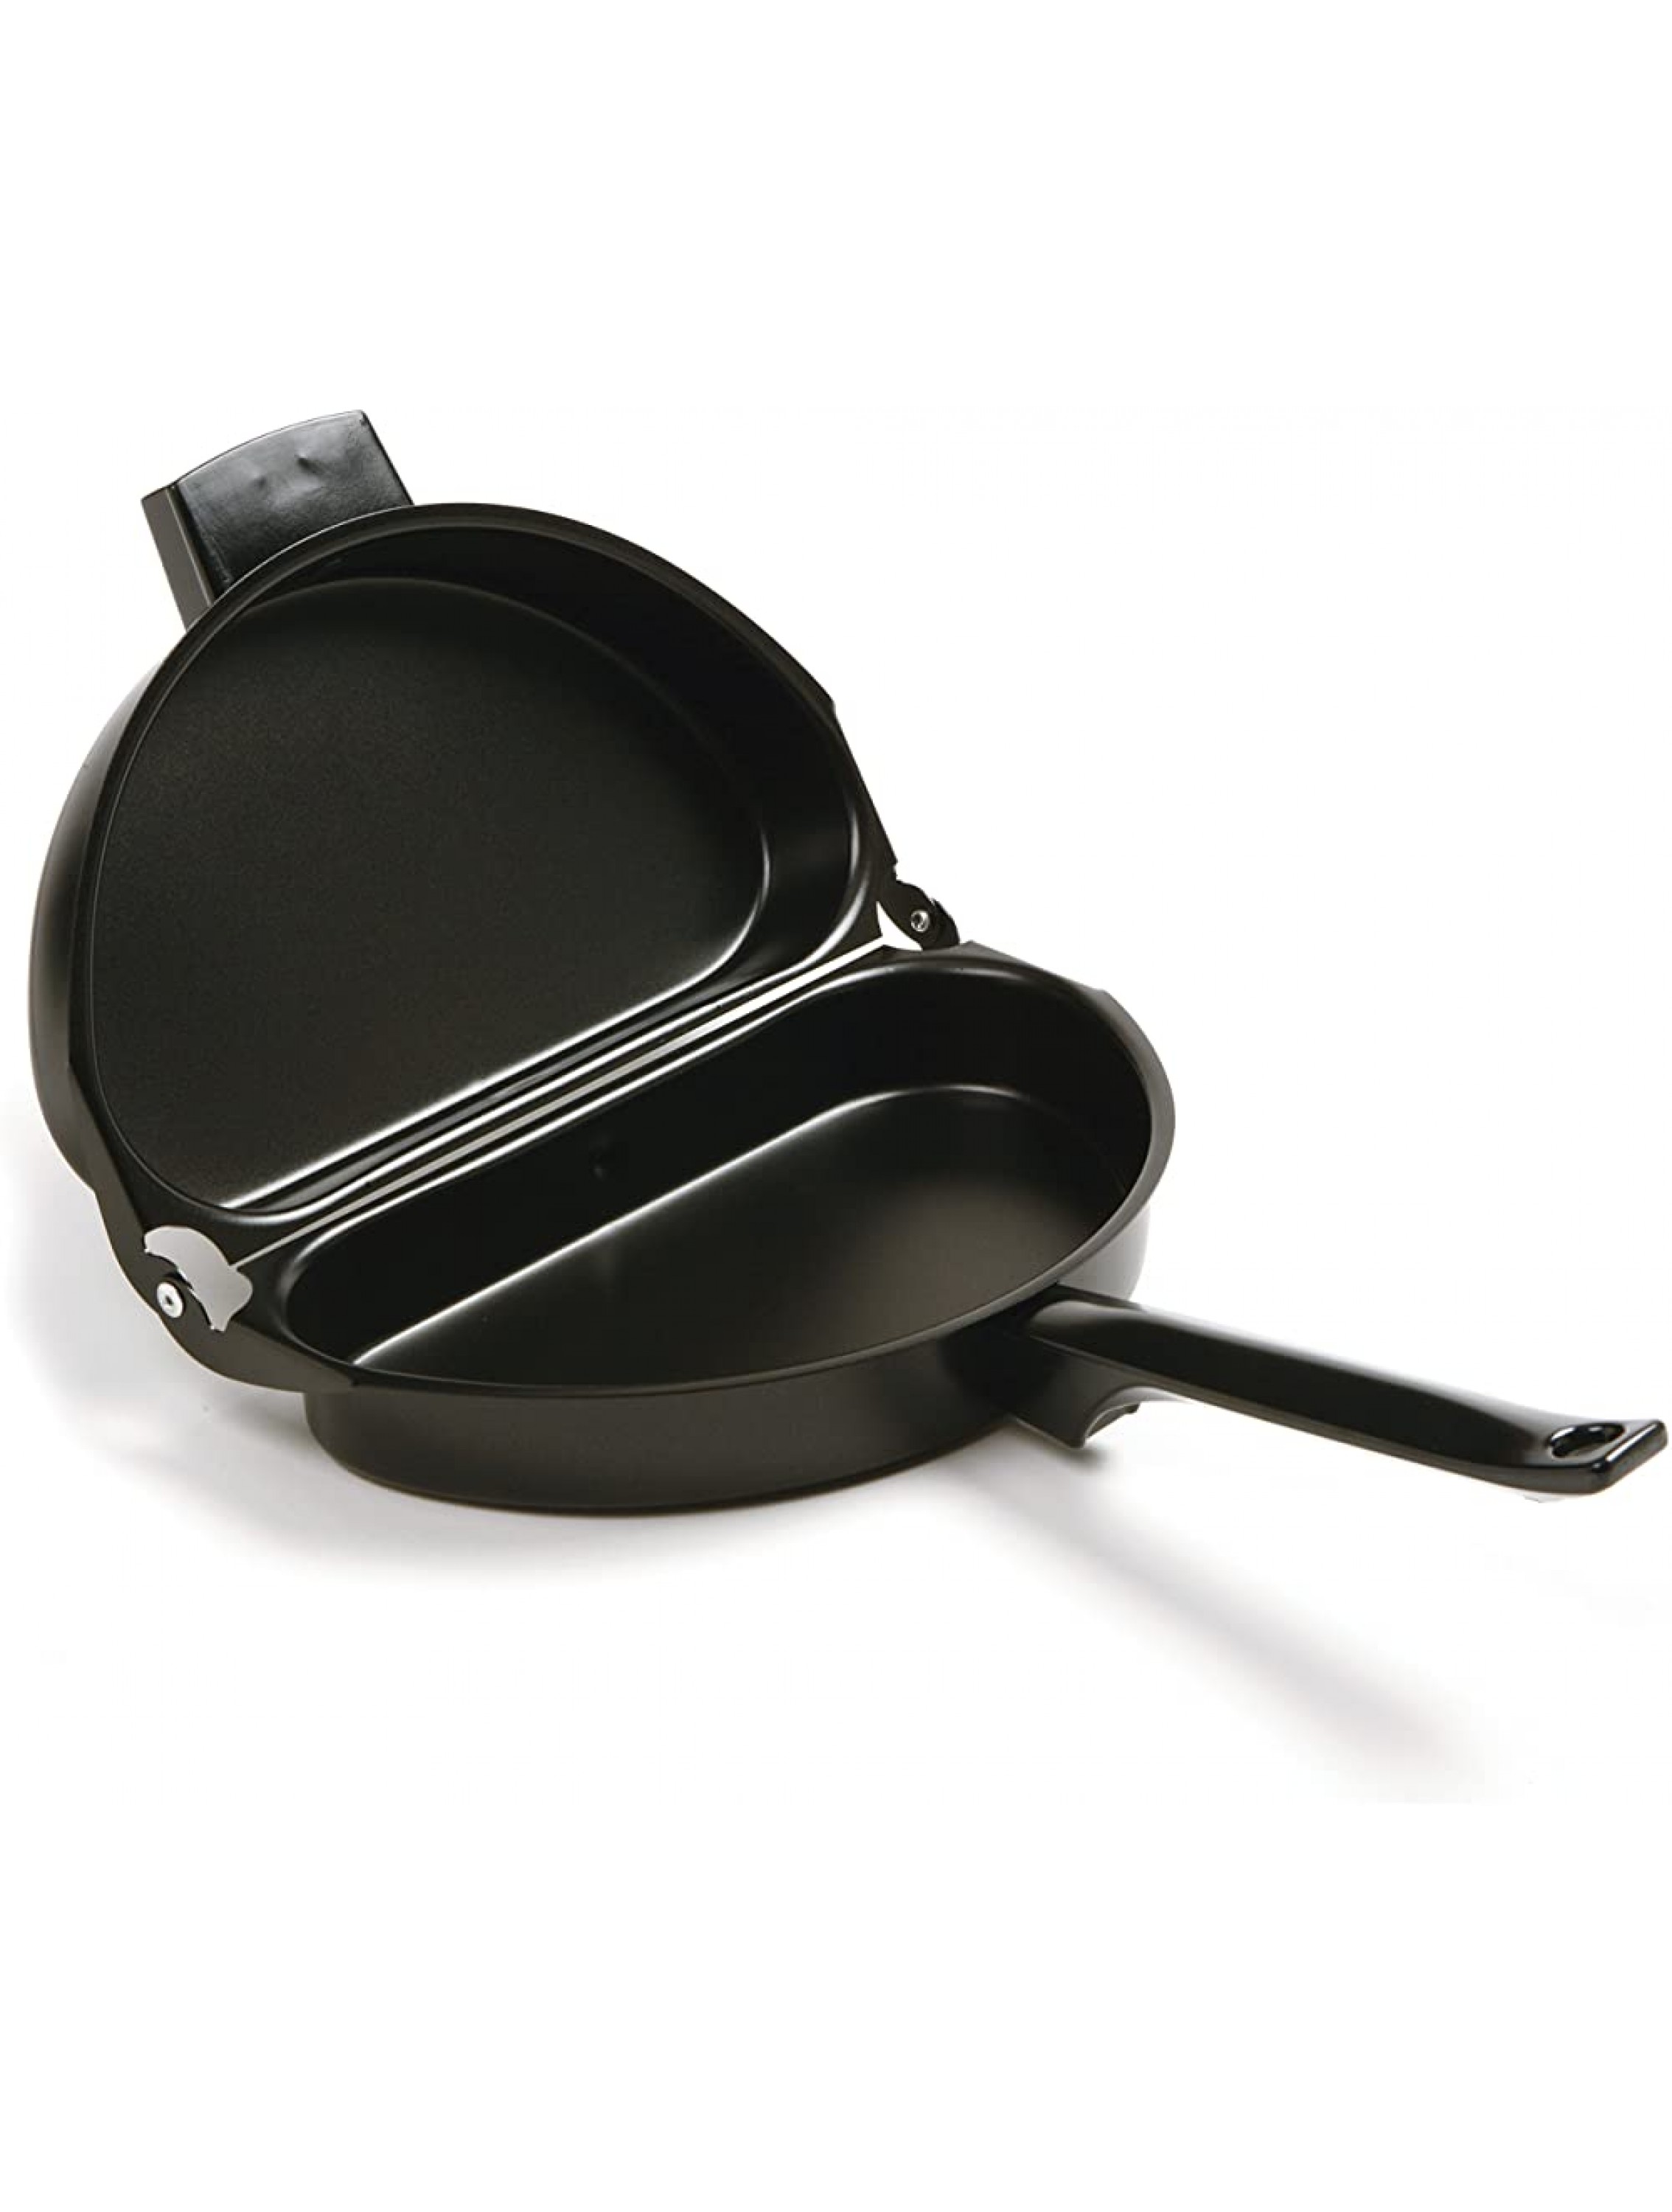 Norpro Nonstick Omelet Pan 9.2 inches Black - BBFGNSZRA